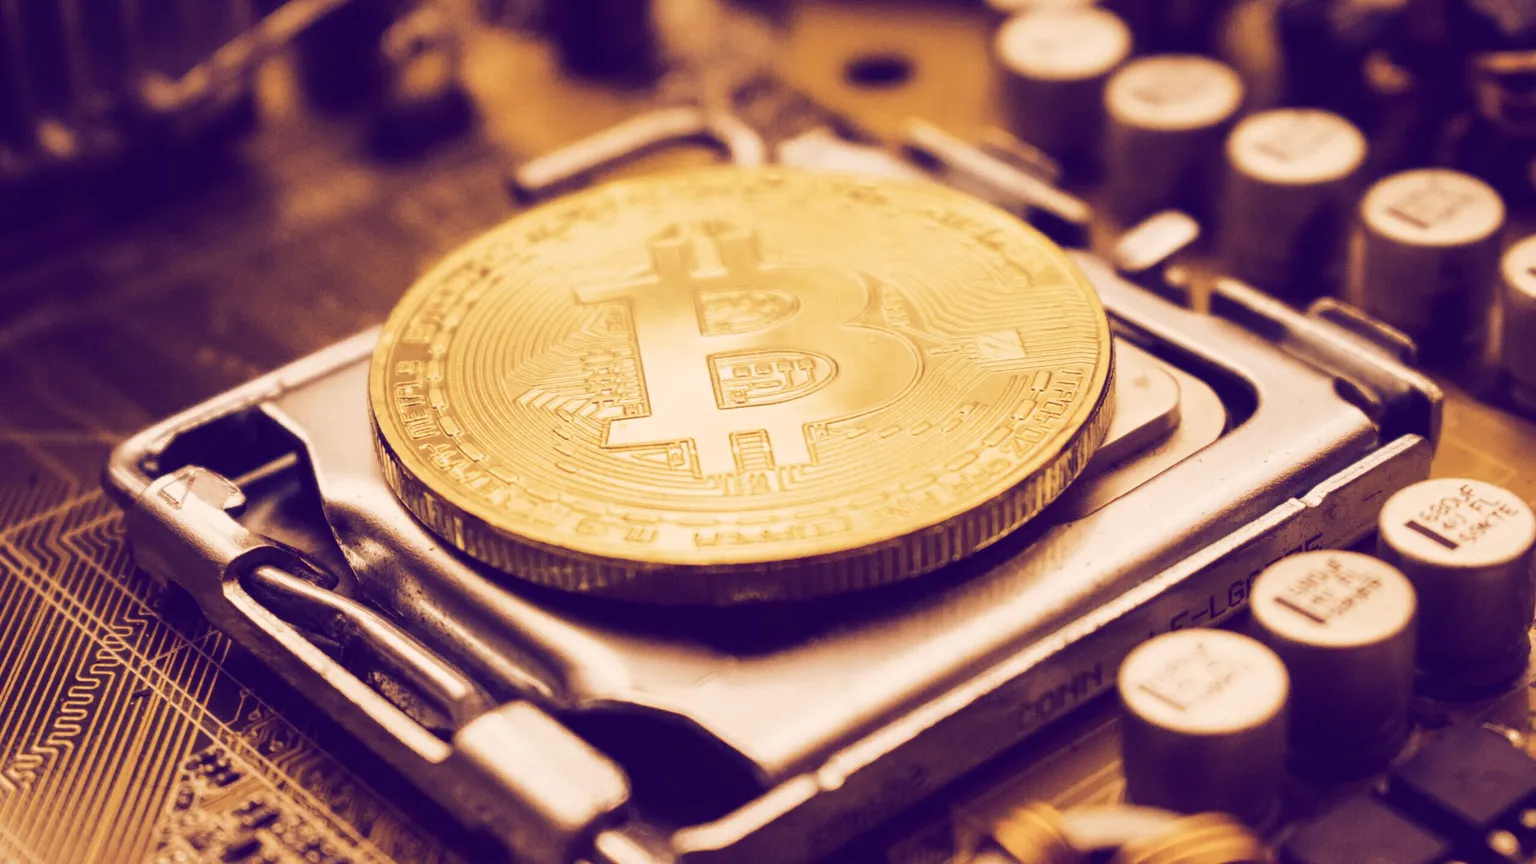 Bitcoin miners faced police action in Malaysia. Image: Unsplash